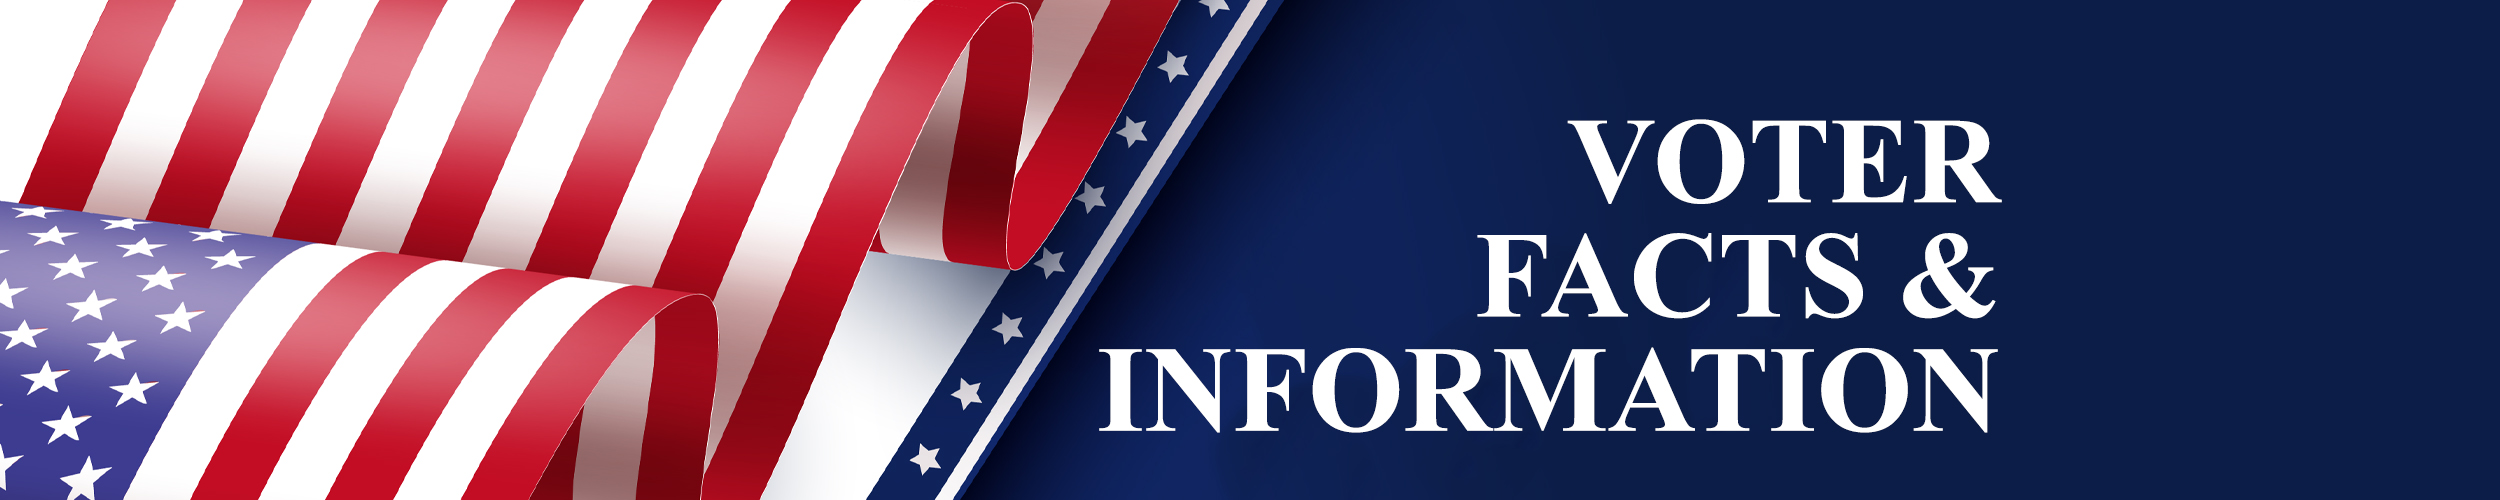 Image of American flag "Voter Facts & Information"